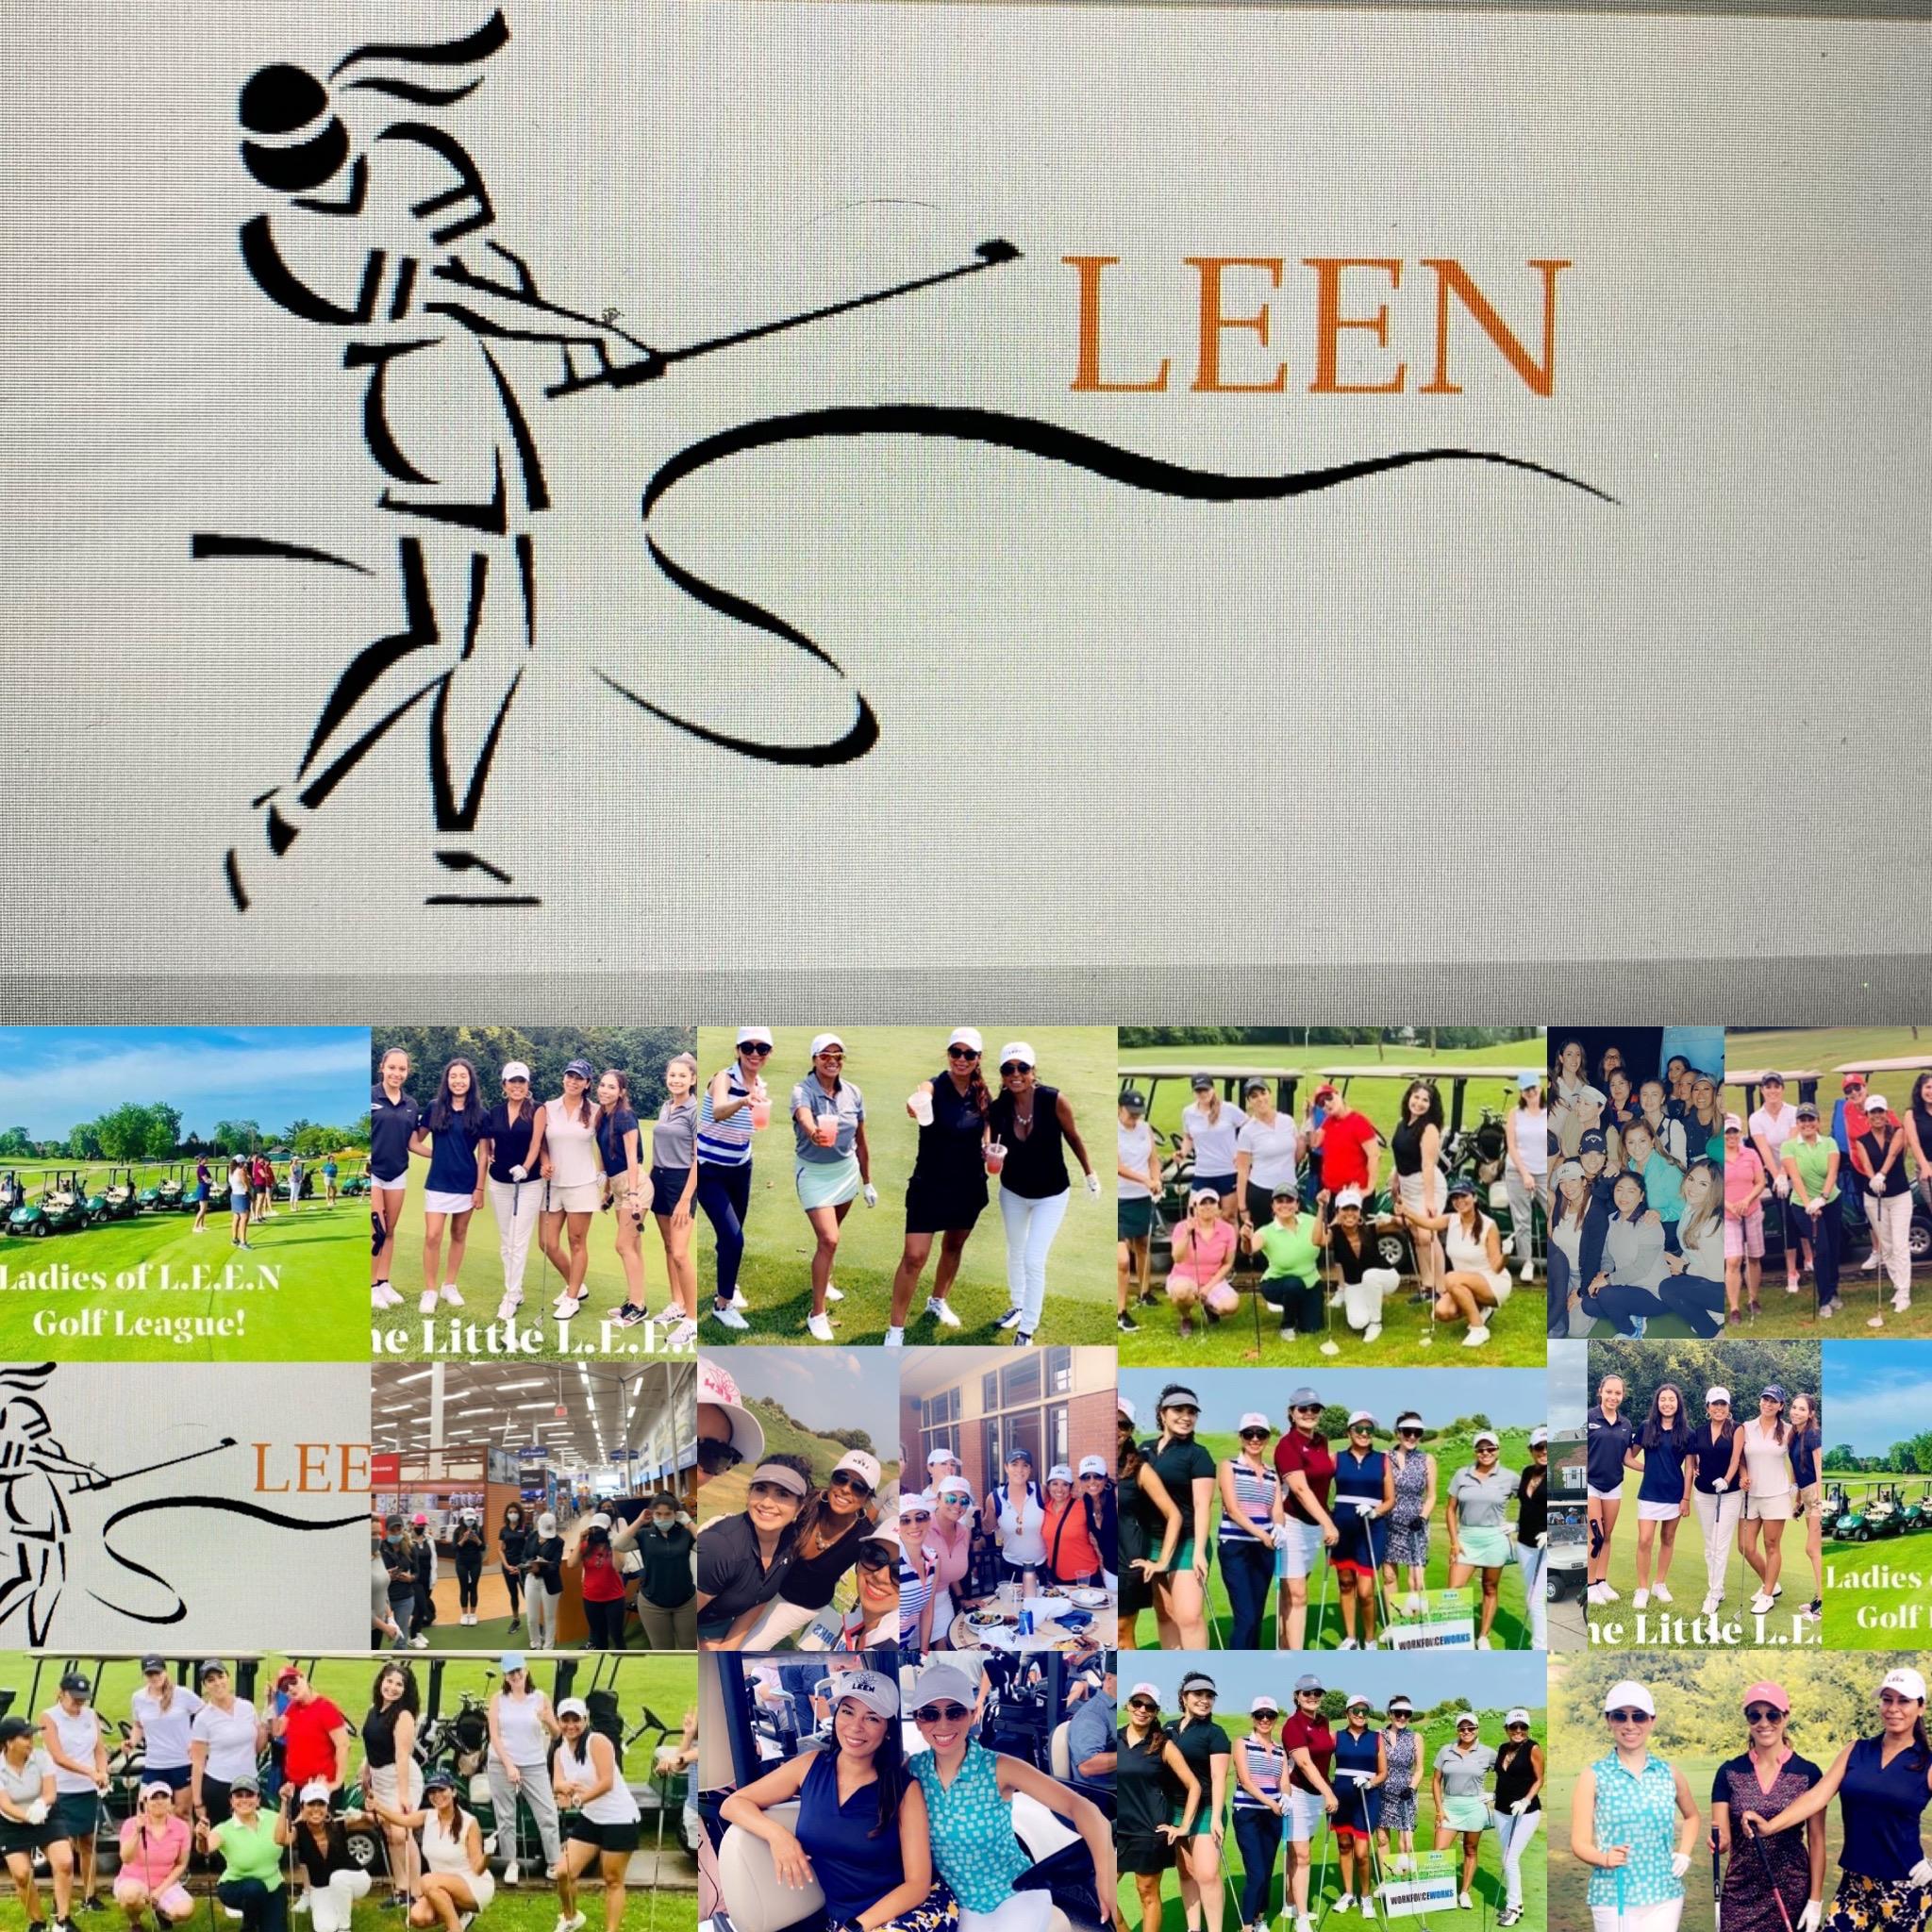 LEEN Golf Outing